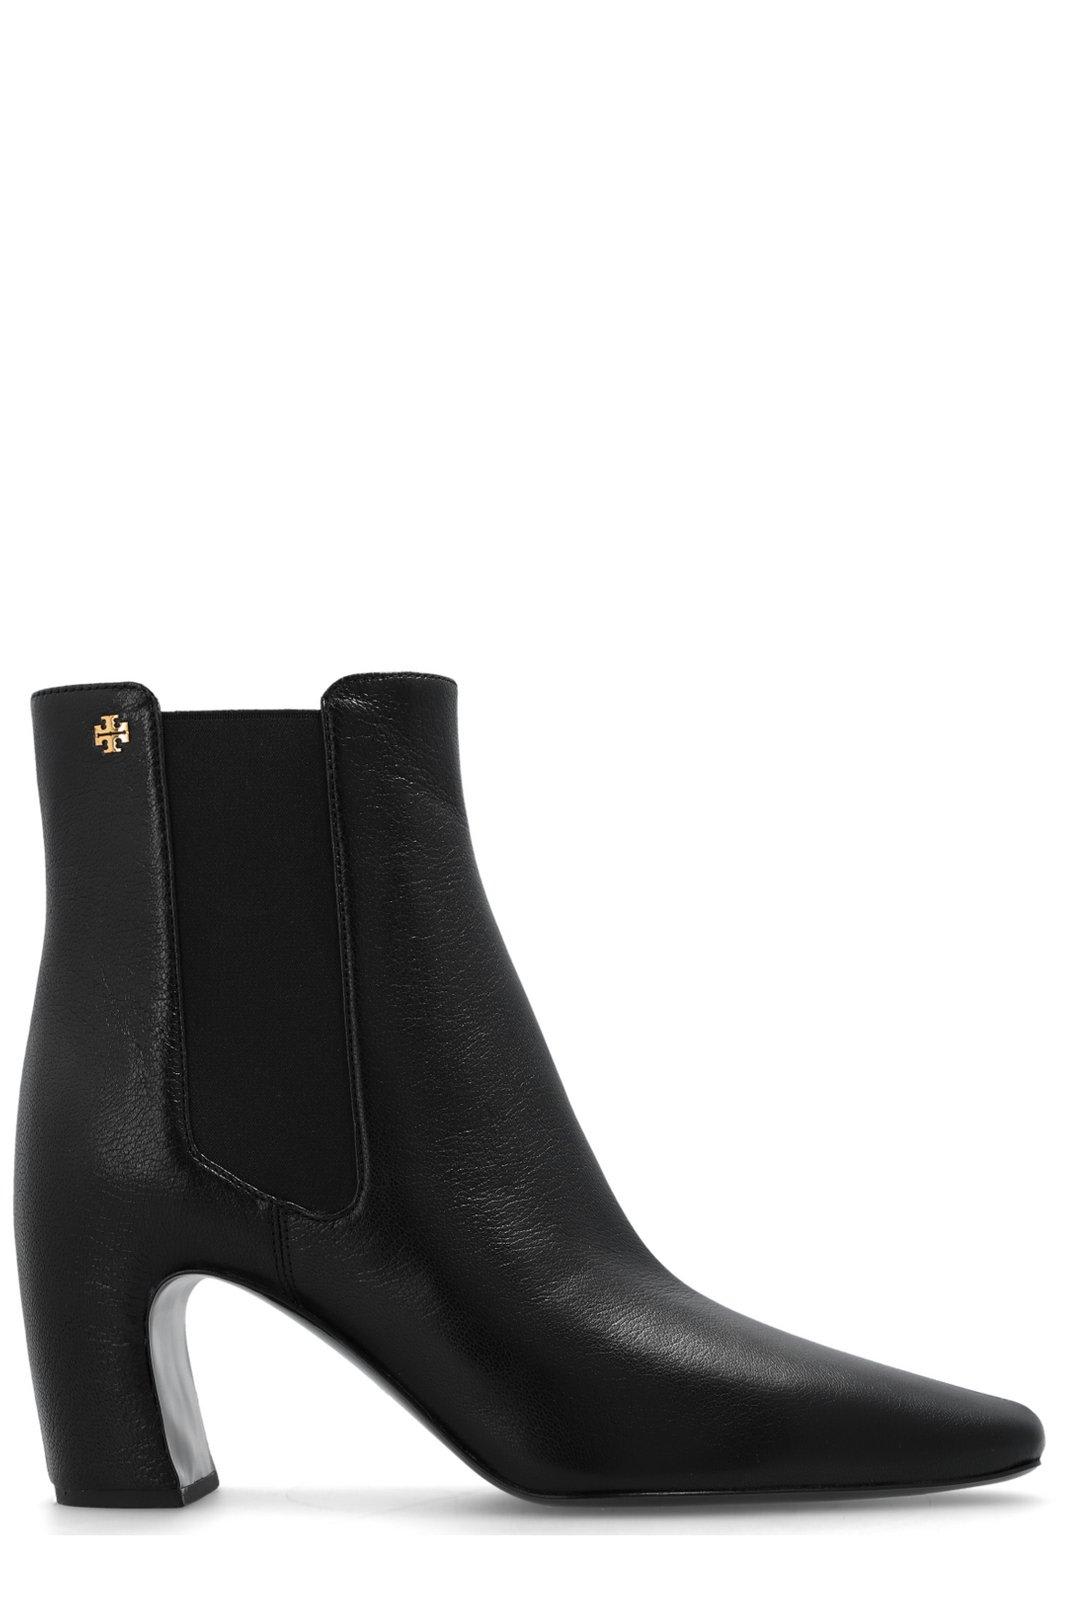 TORY BURCH SQUARE TOE HEELED BOOTS